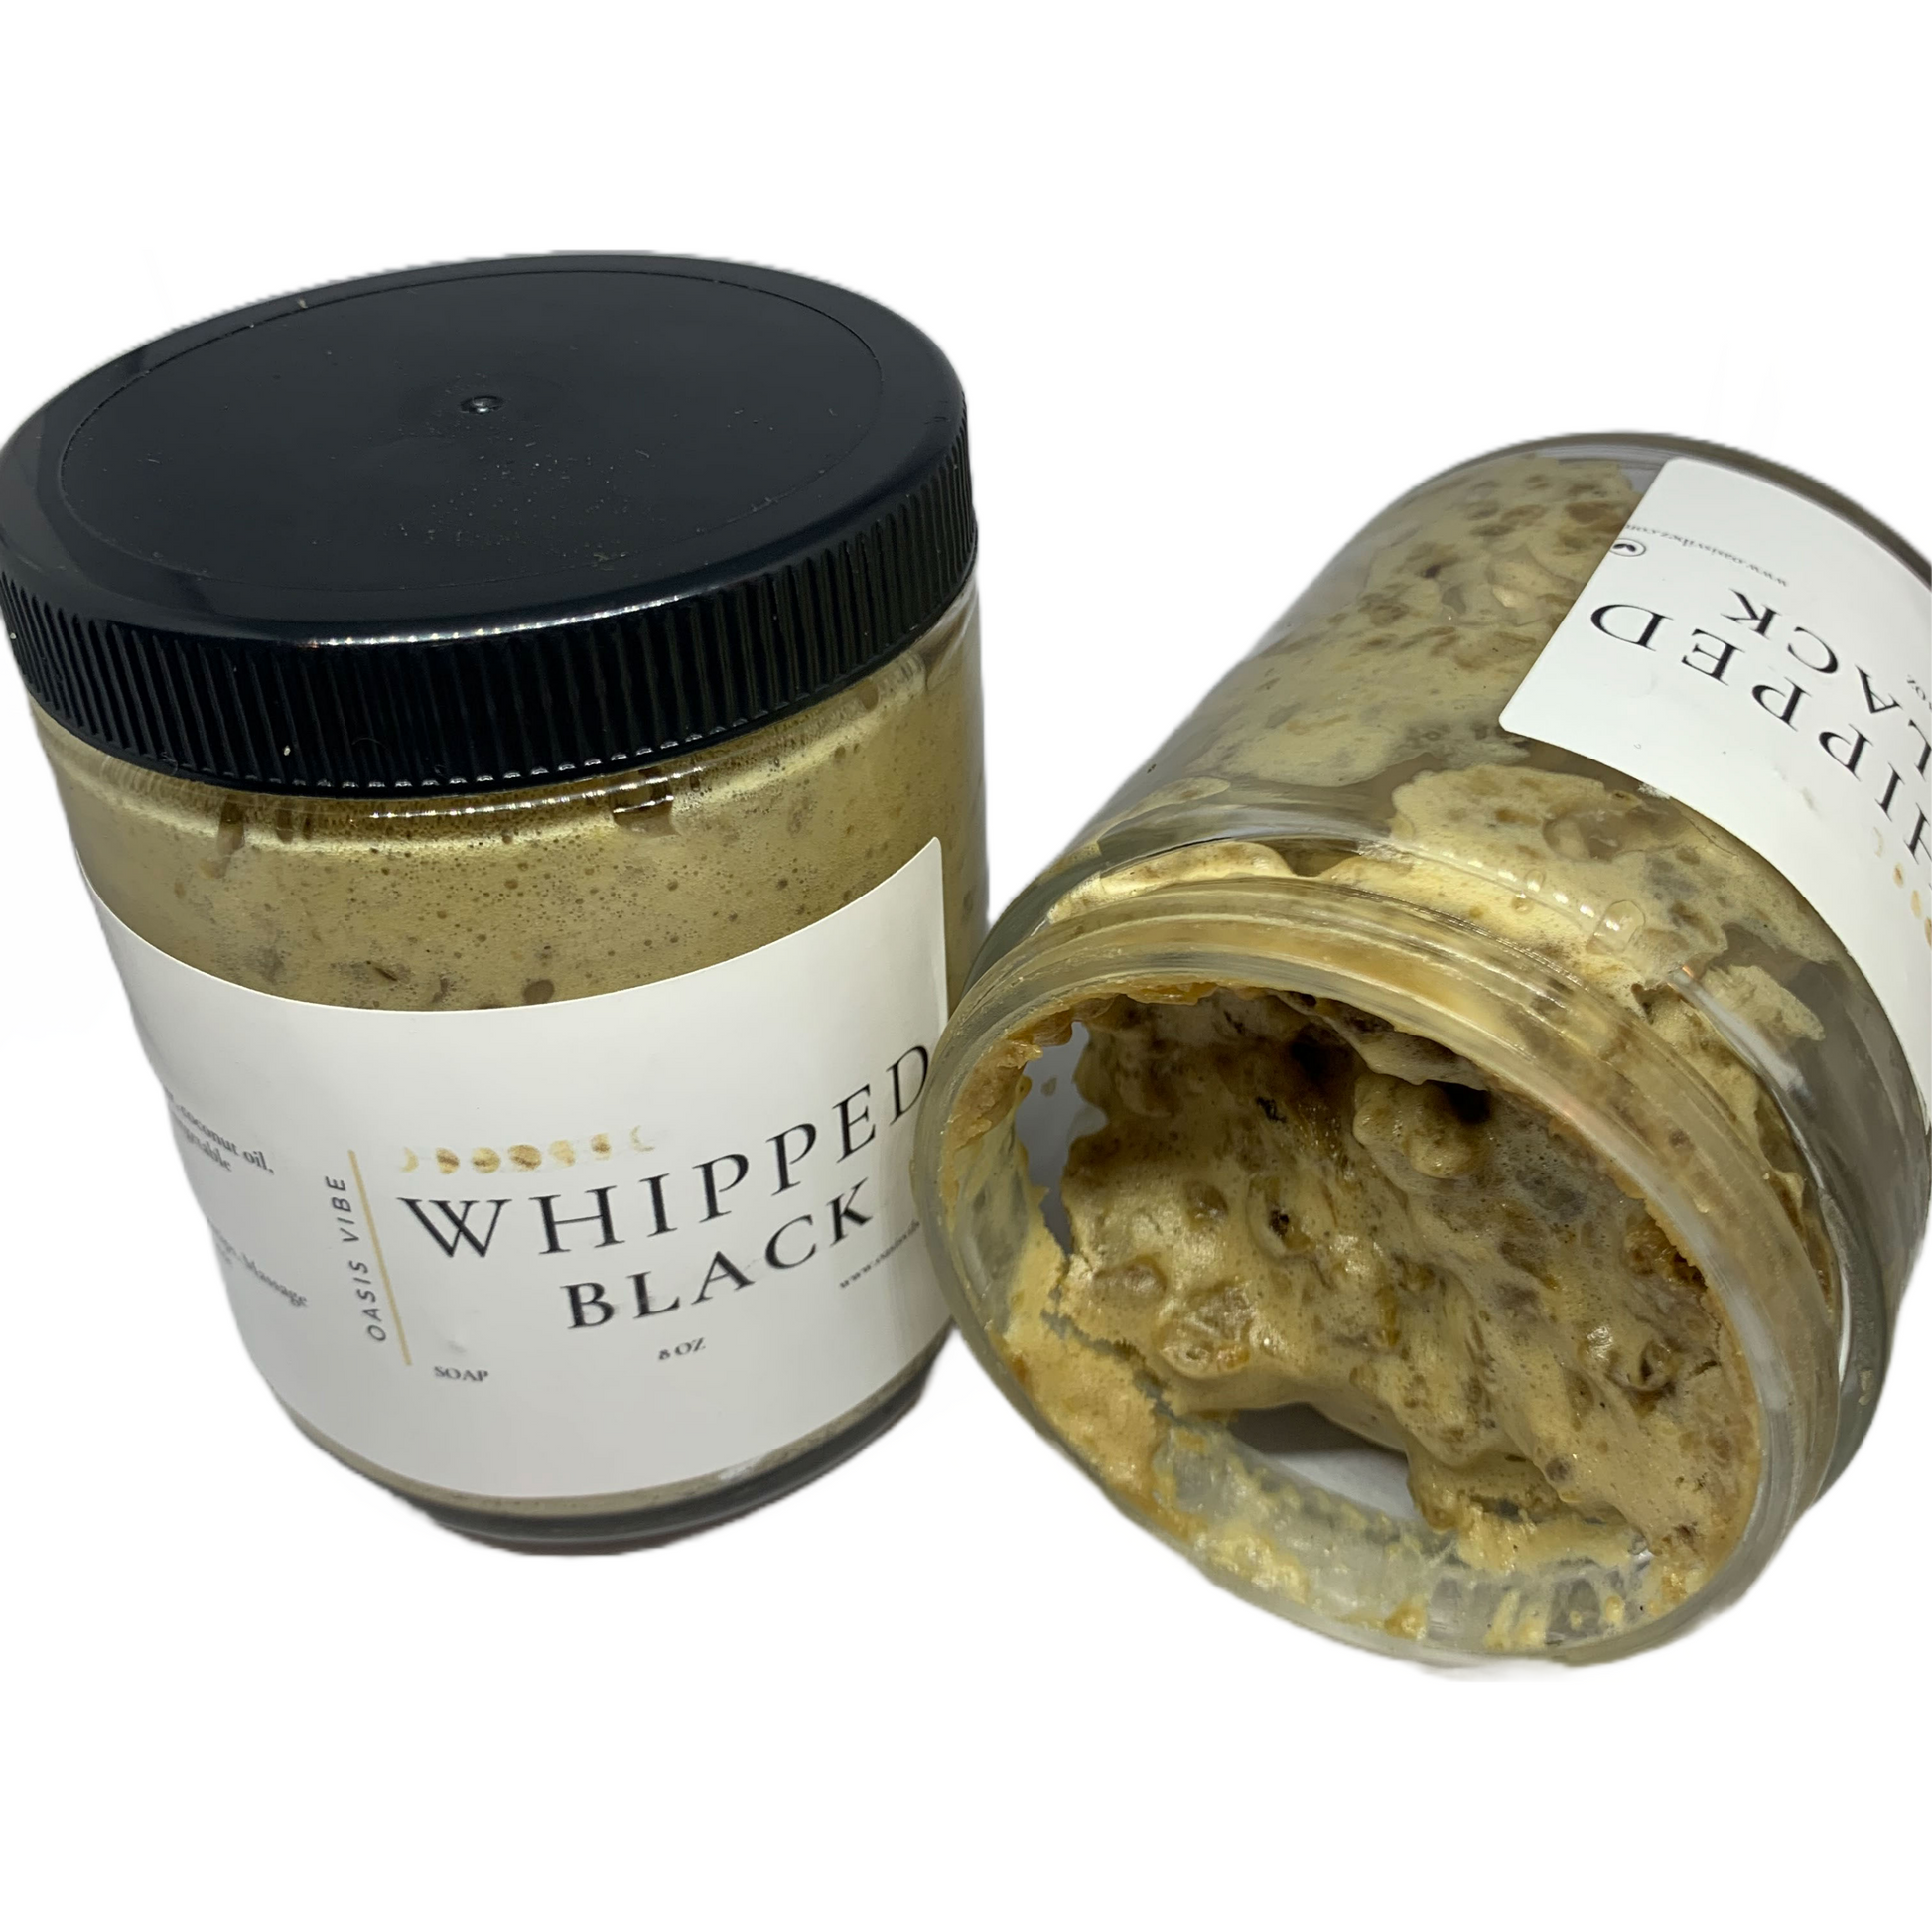 Whipped Black Soap